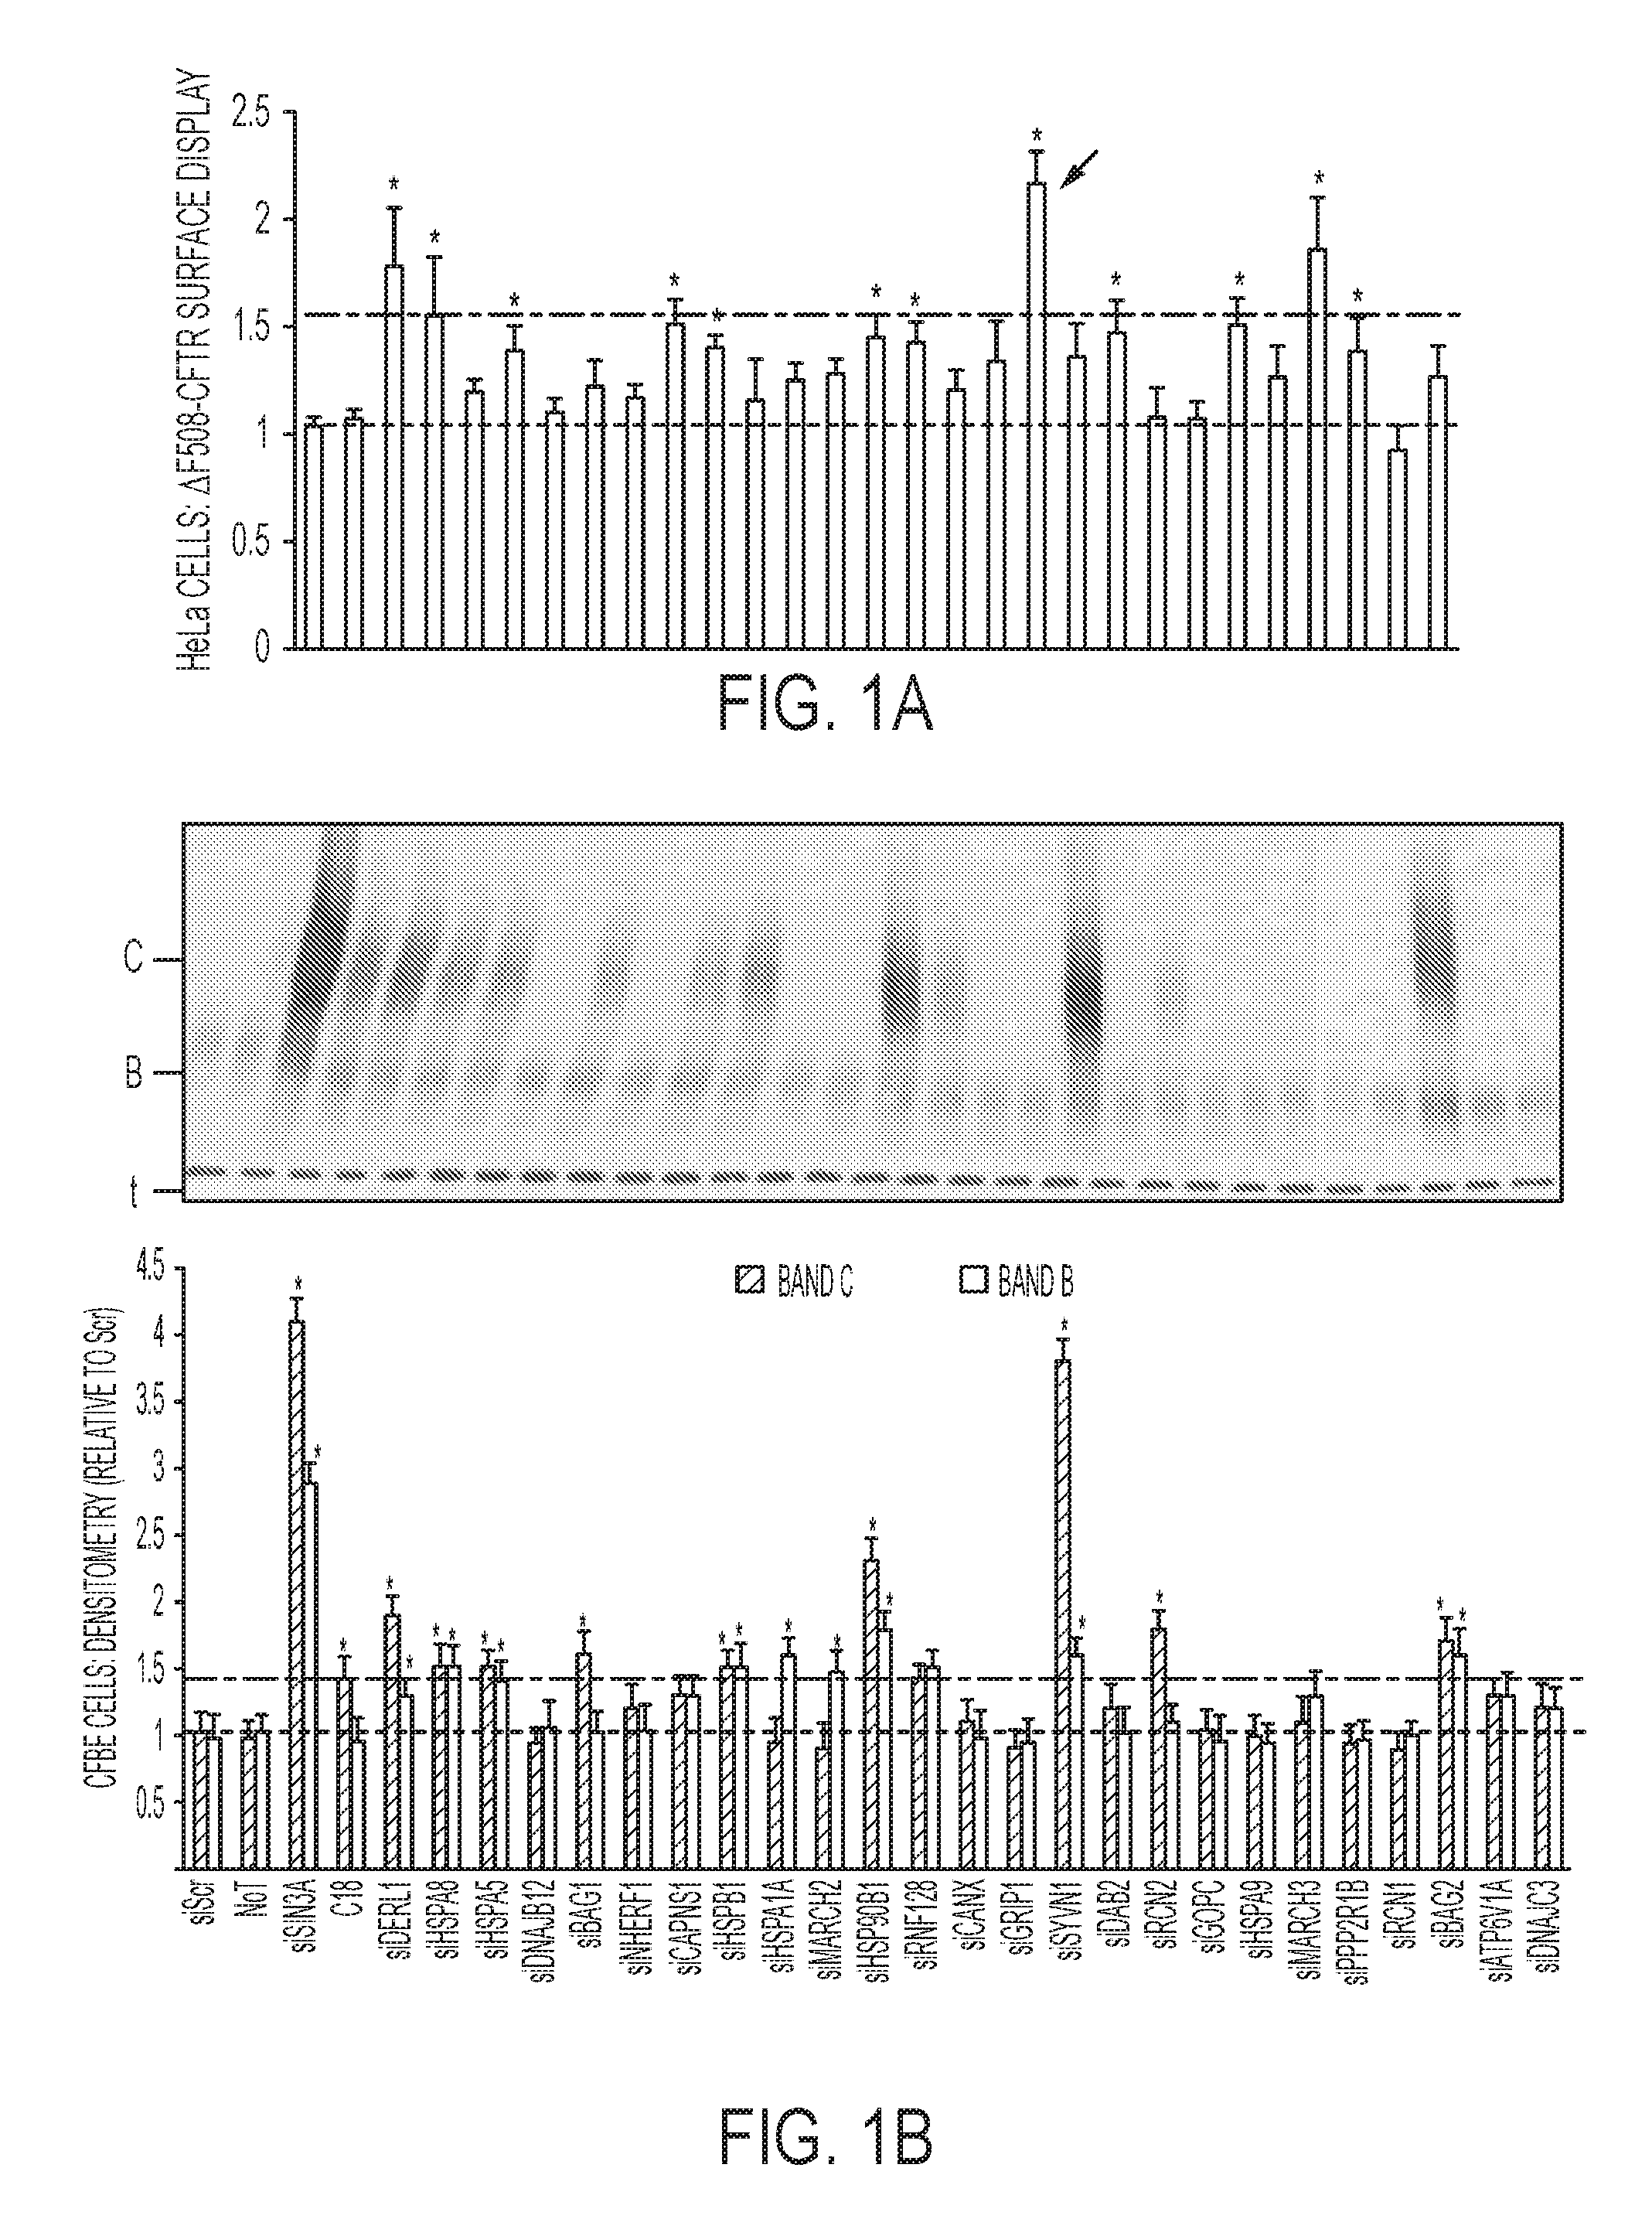 Method of regulating cftr expression and processing